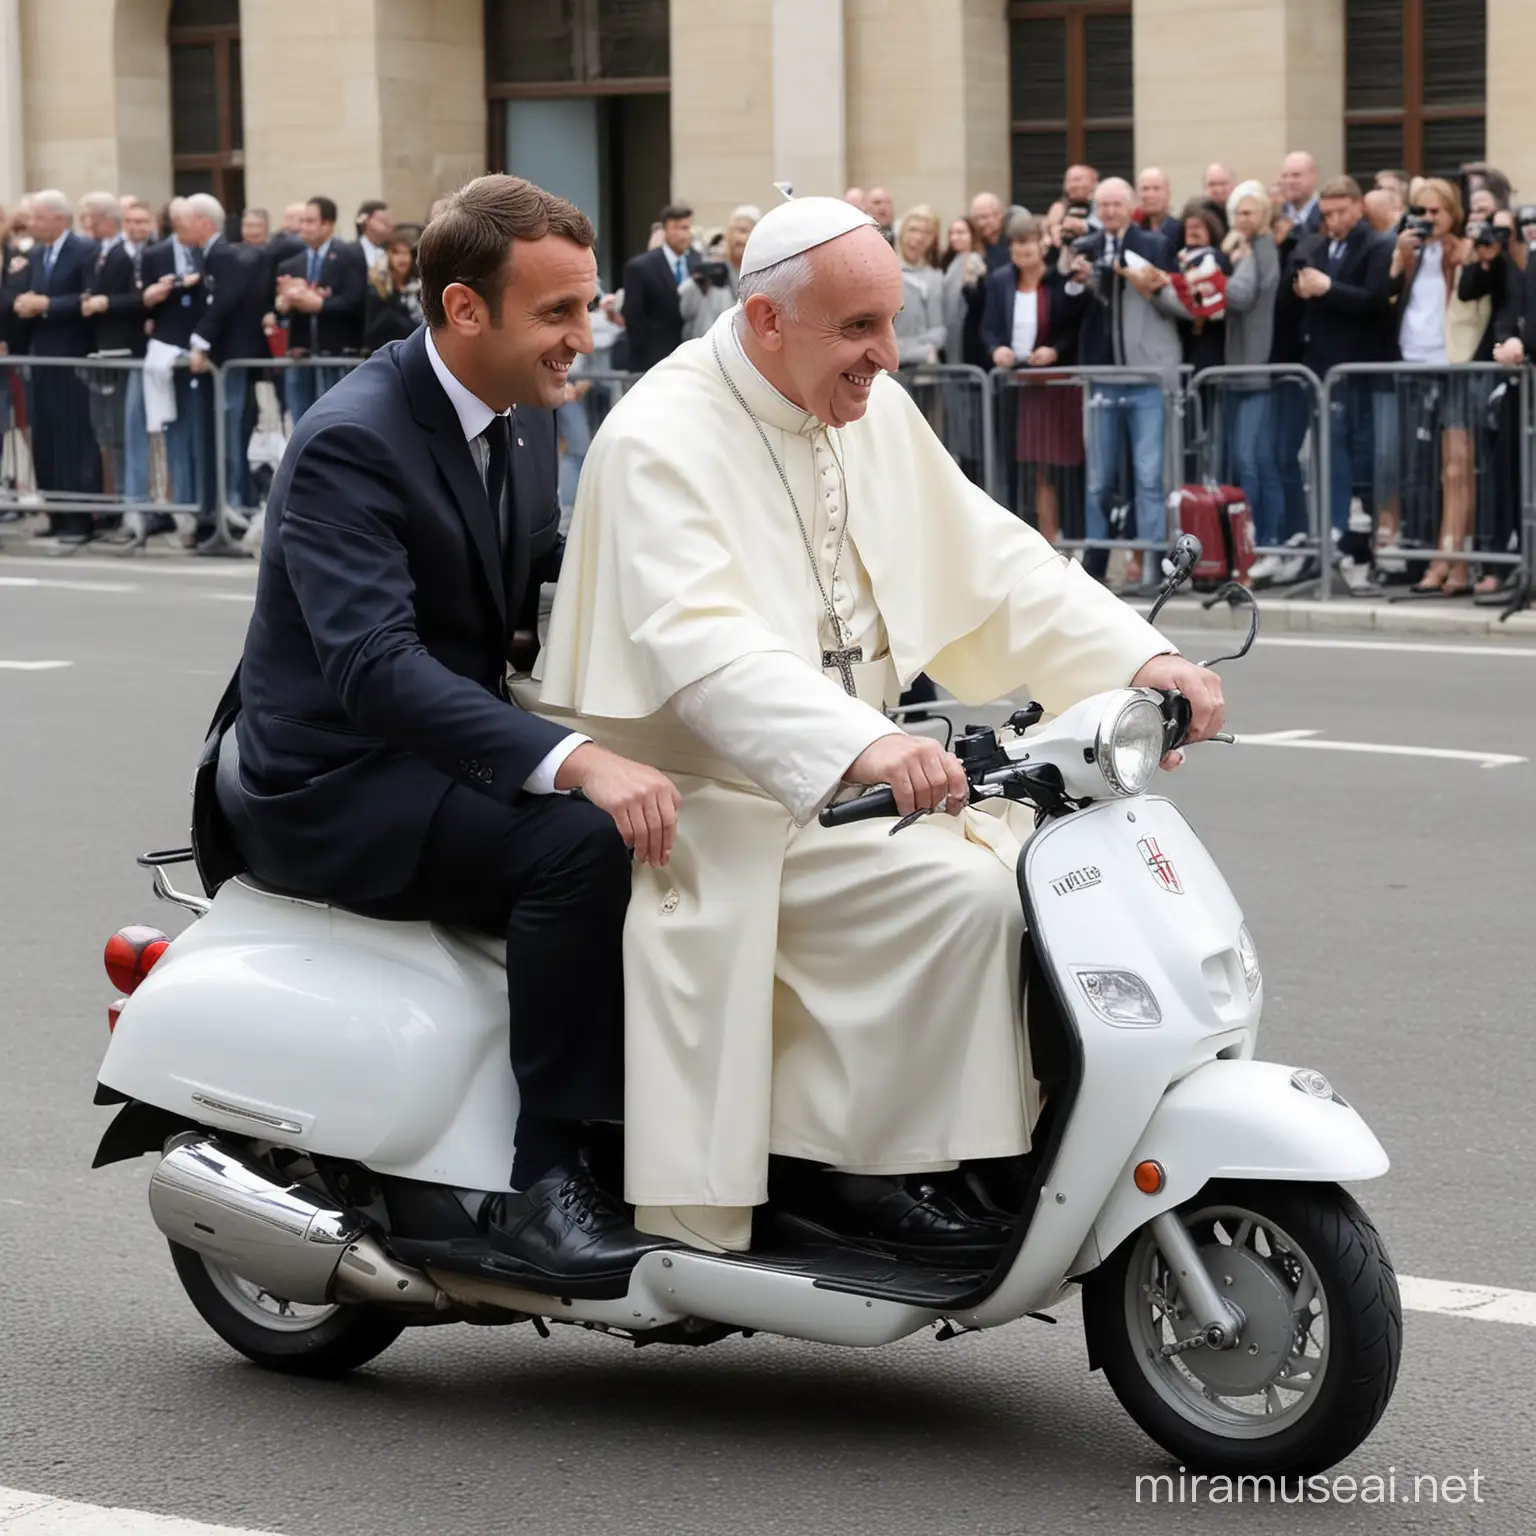 Pope Riding Moped with Emmanuel Macron on Luggage Rack